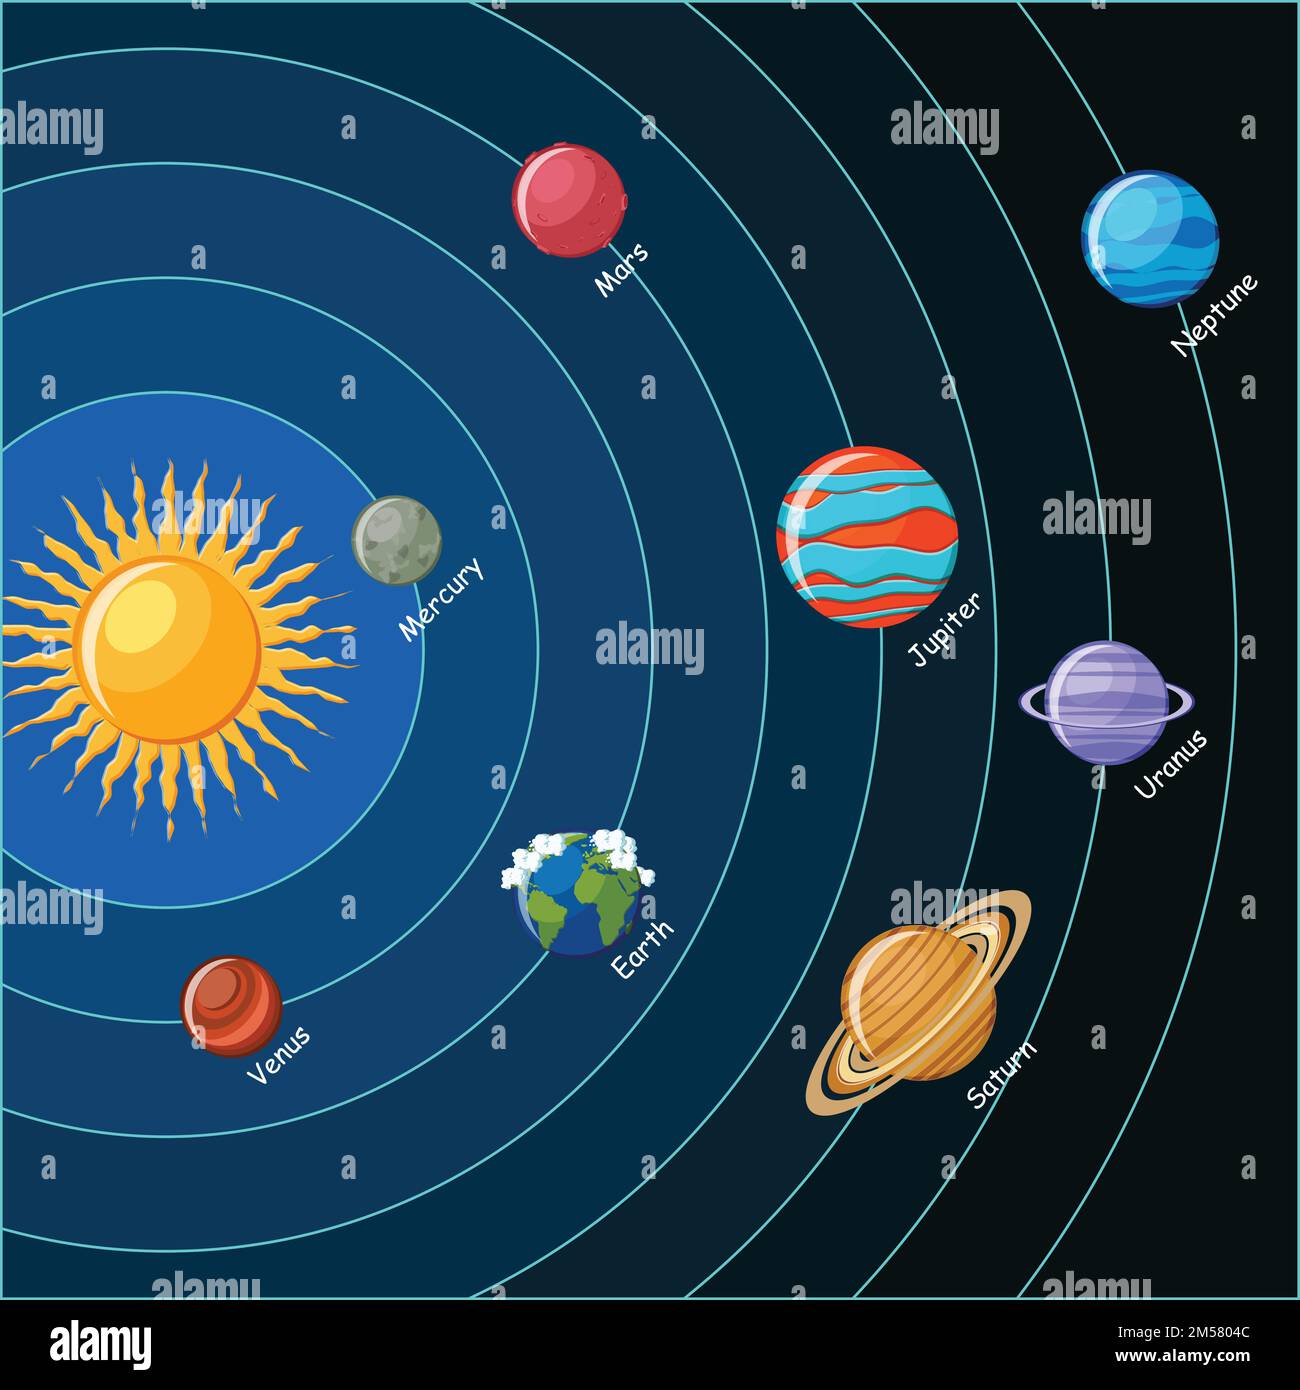 solar system planets project kids